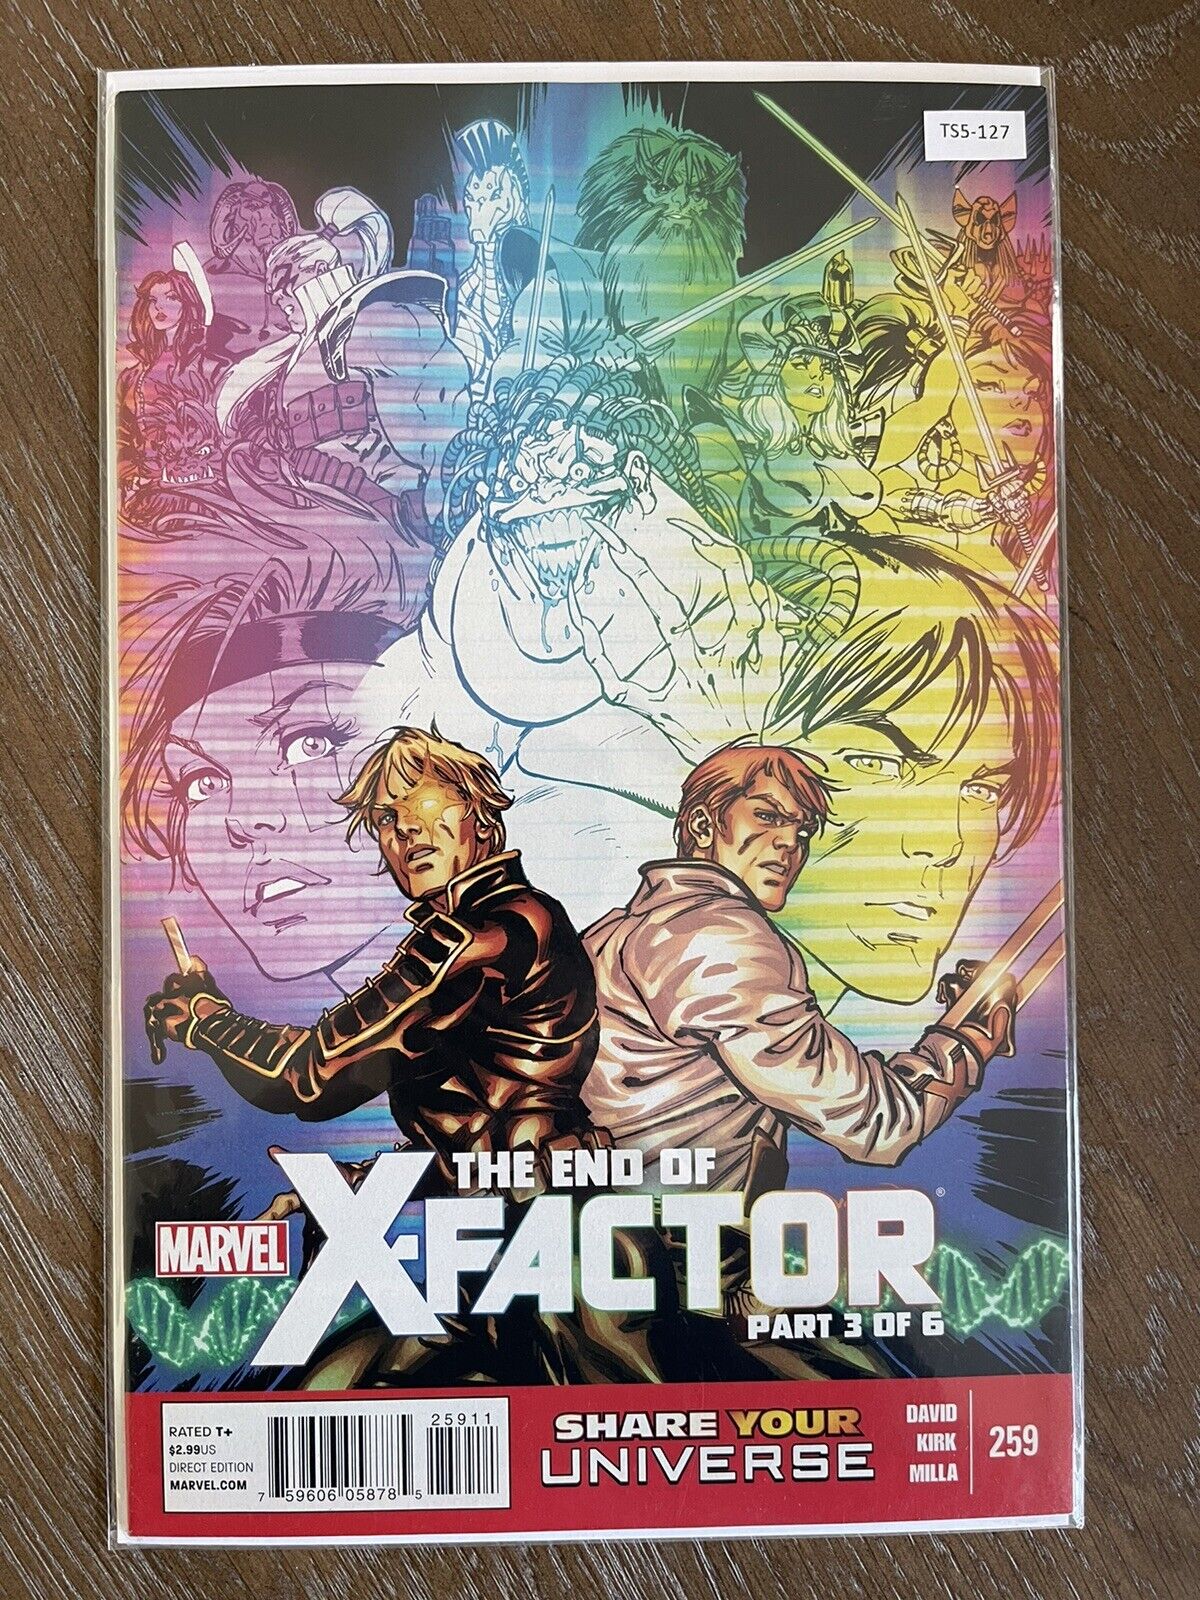 THE END OF X-FACTOR #259 MARVEL COMIC BOOK HIGH GRADE 9.4 TS5-127